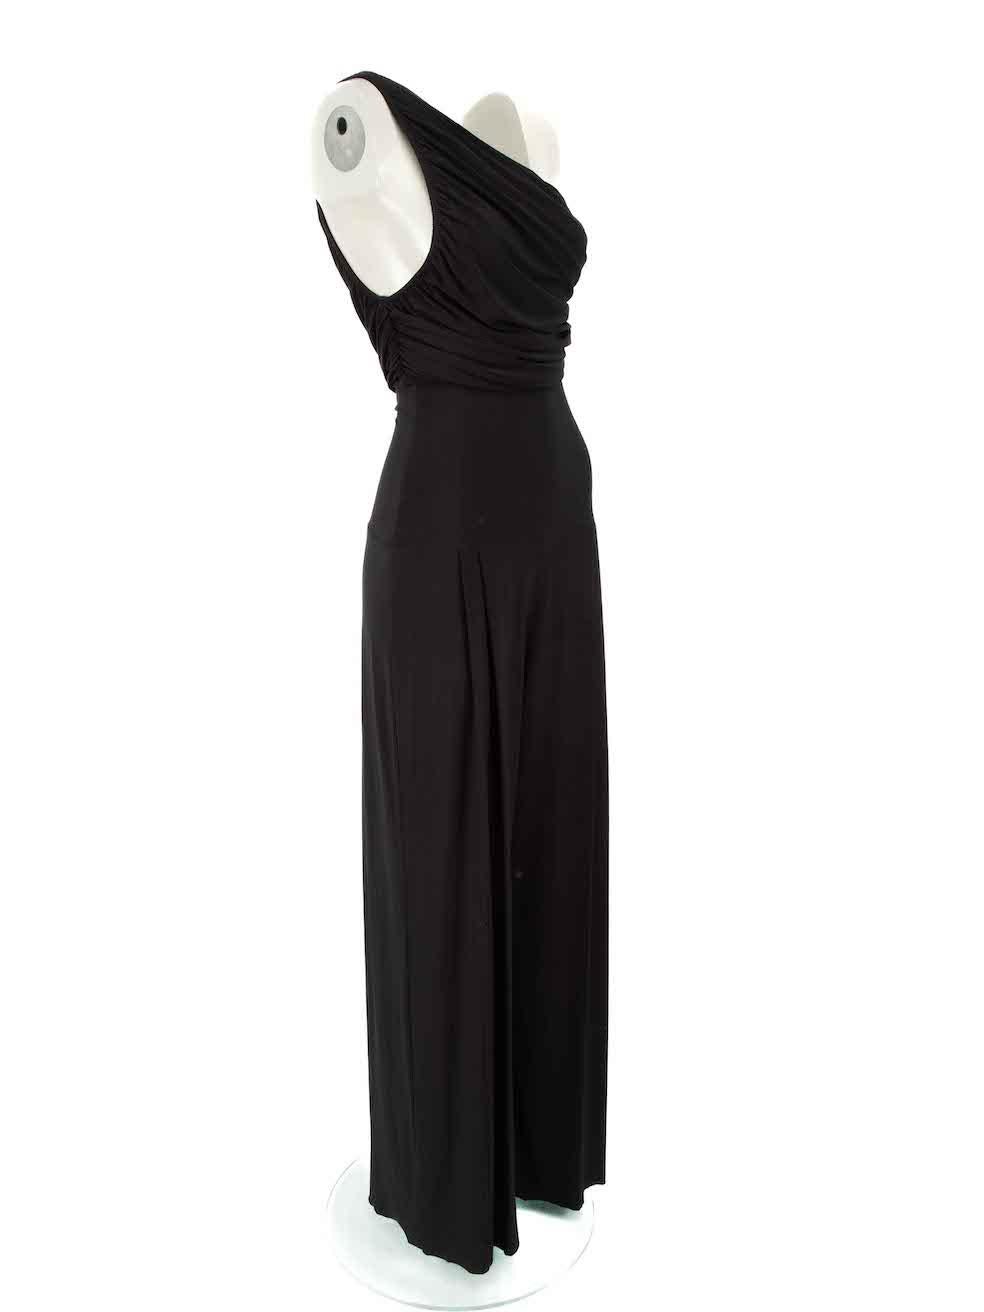 CONDITION is Very good. Minimal wear to set is evident. Minimal wear to the trousers with small hole at the left leg above the cuff and a pluck to the weave at the right leg on this used Norma Kamali designer resale item.

 Details
 Black
